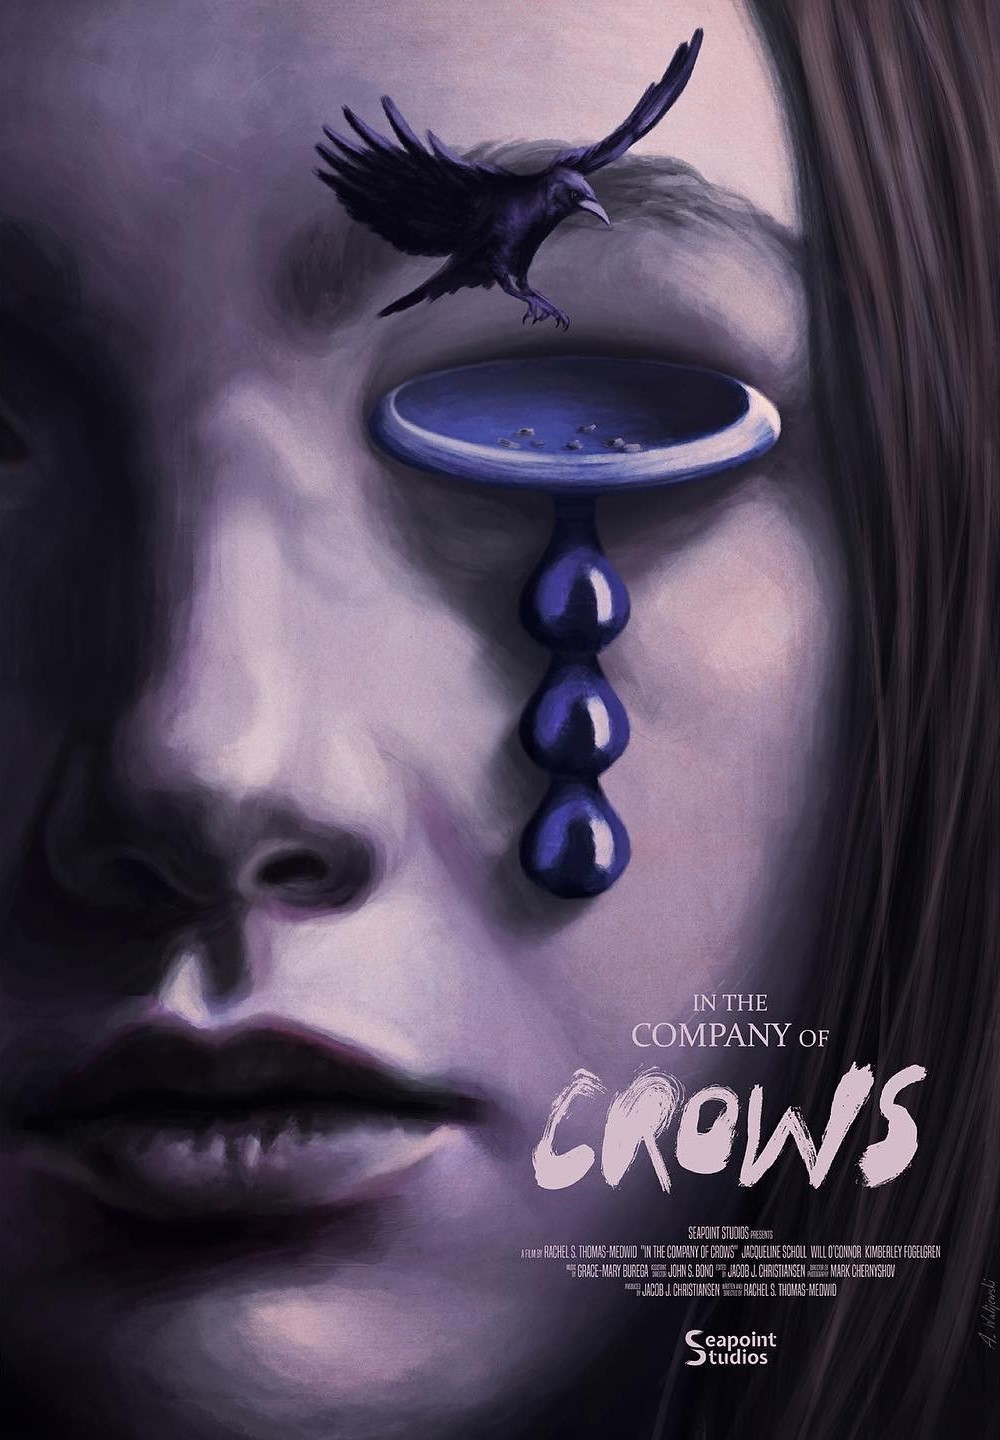 In the Company of Crows